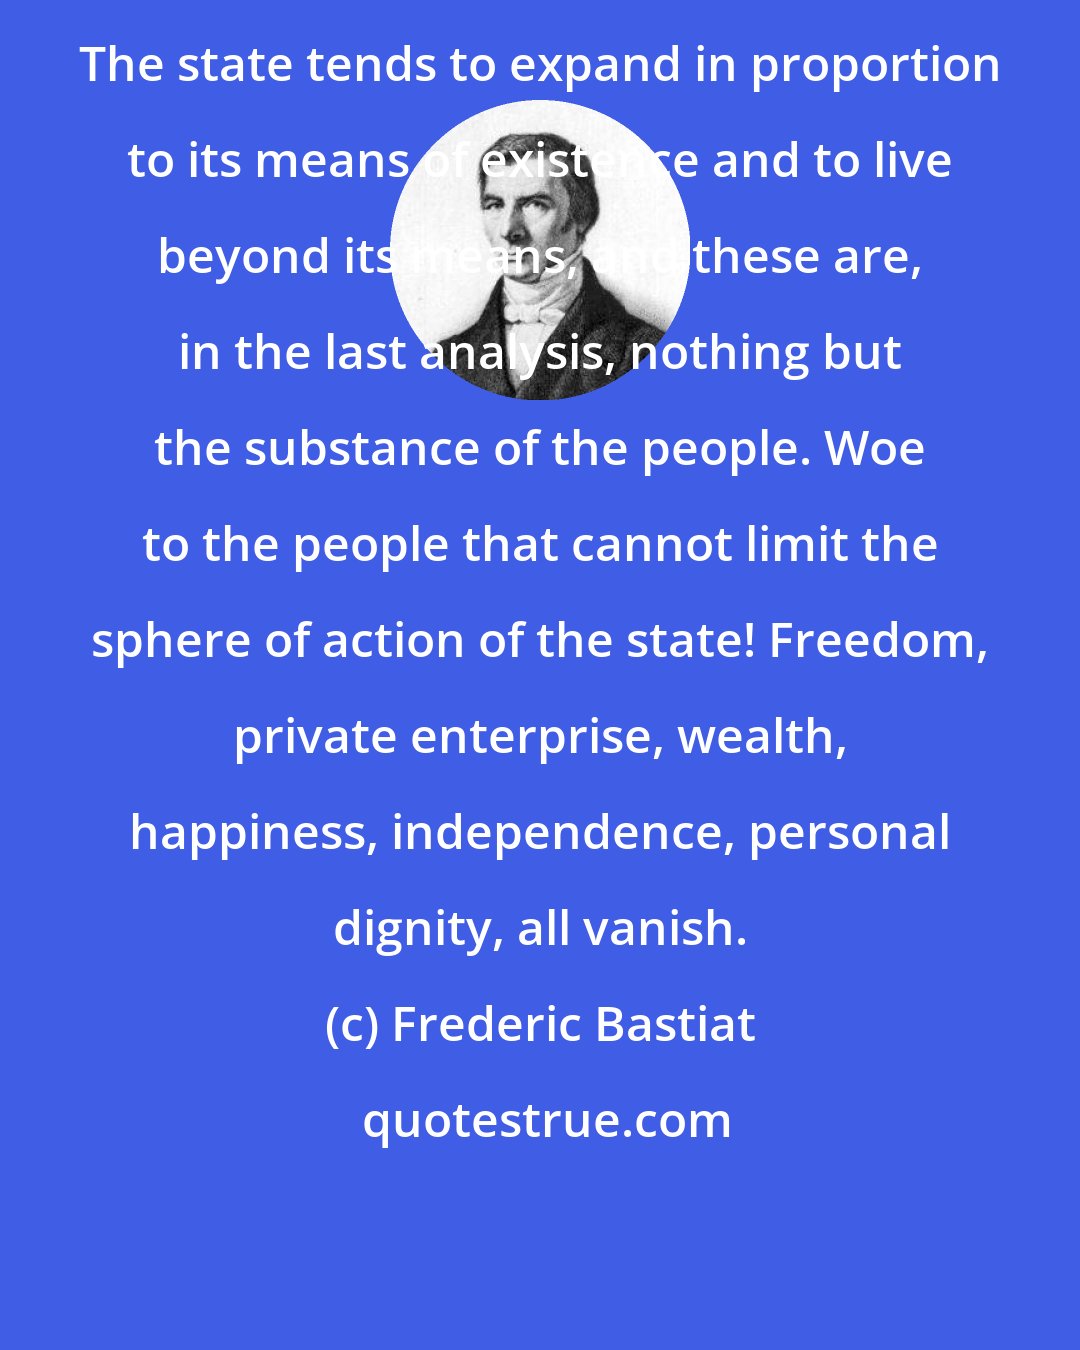 Frederic Bastiat: The state tends to expand in proportion to its means of existence and to live beyond its means, and these are, in the last analysis, nothing but the substance of the people. Woe to the people that cannot limit the sphere of action of the state! Freedom, private enterprise, wealth, happiness, independence, personal dignity, all vanish.